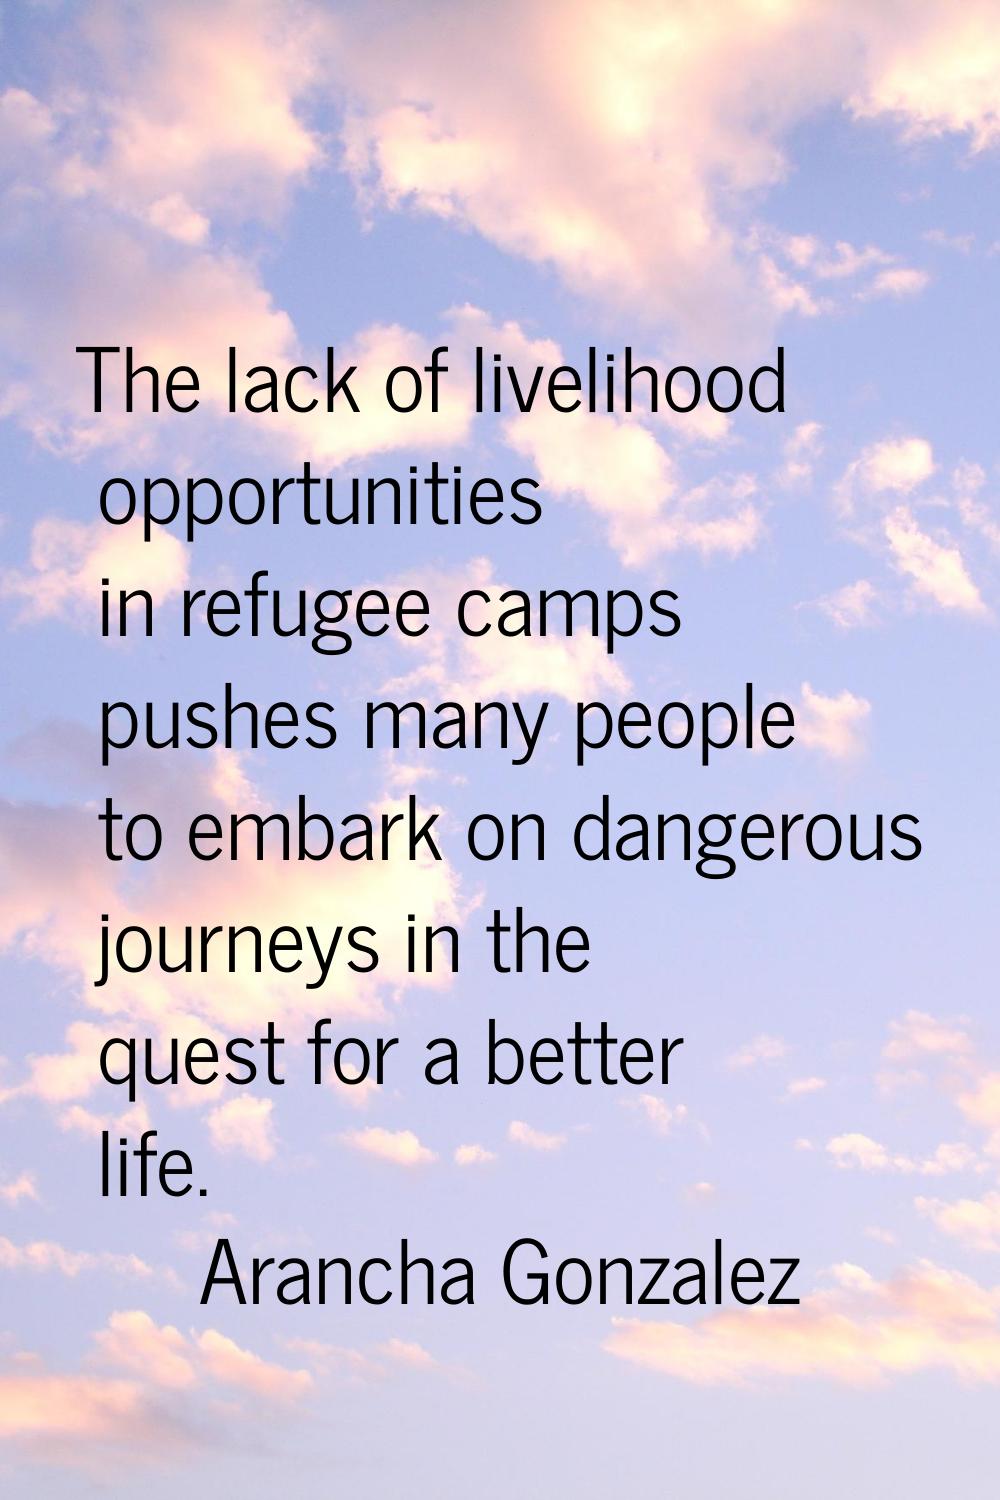 The lack of livelihood opportunities in refugee camps pushes many people to embark on dangerous jou